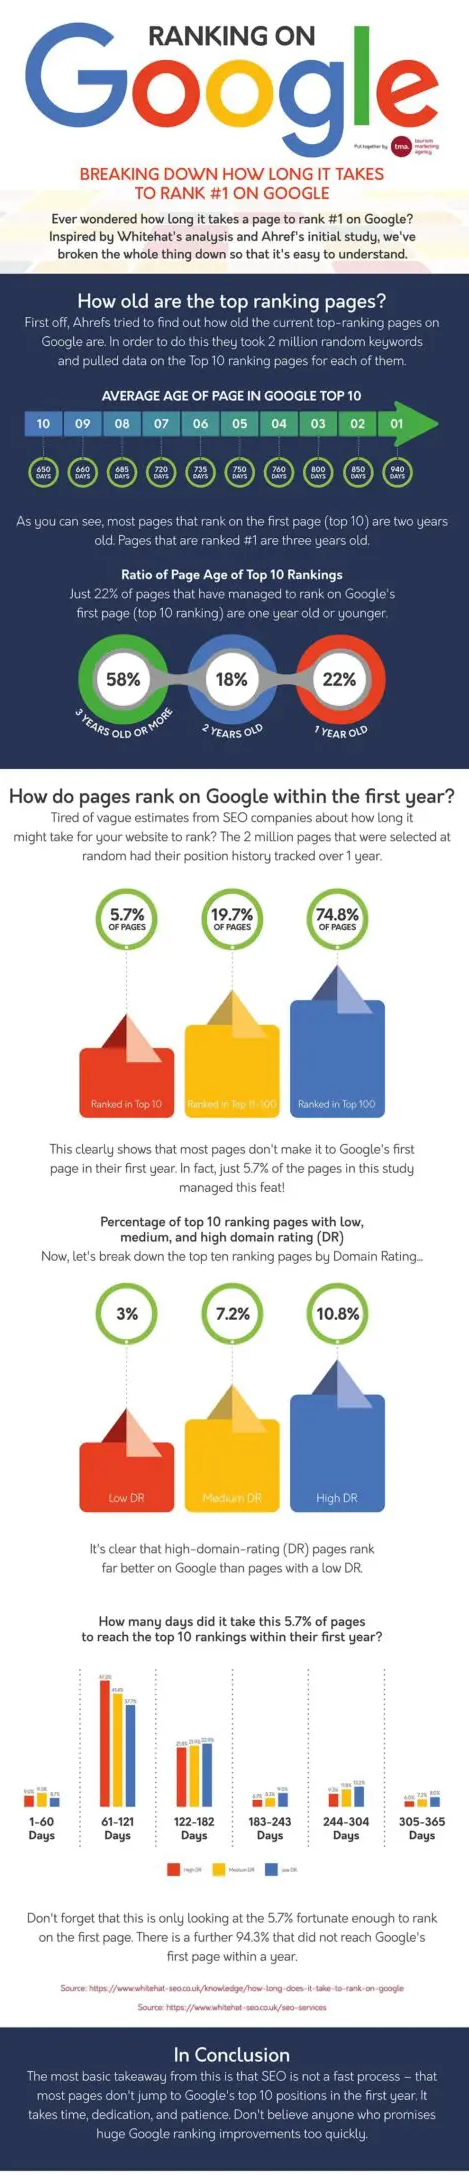  How long does it take to rank #1 on Google?